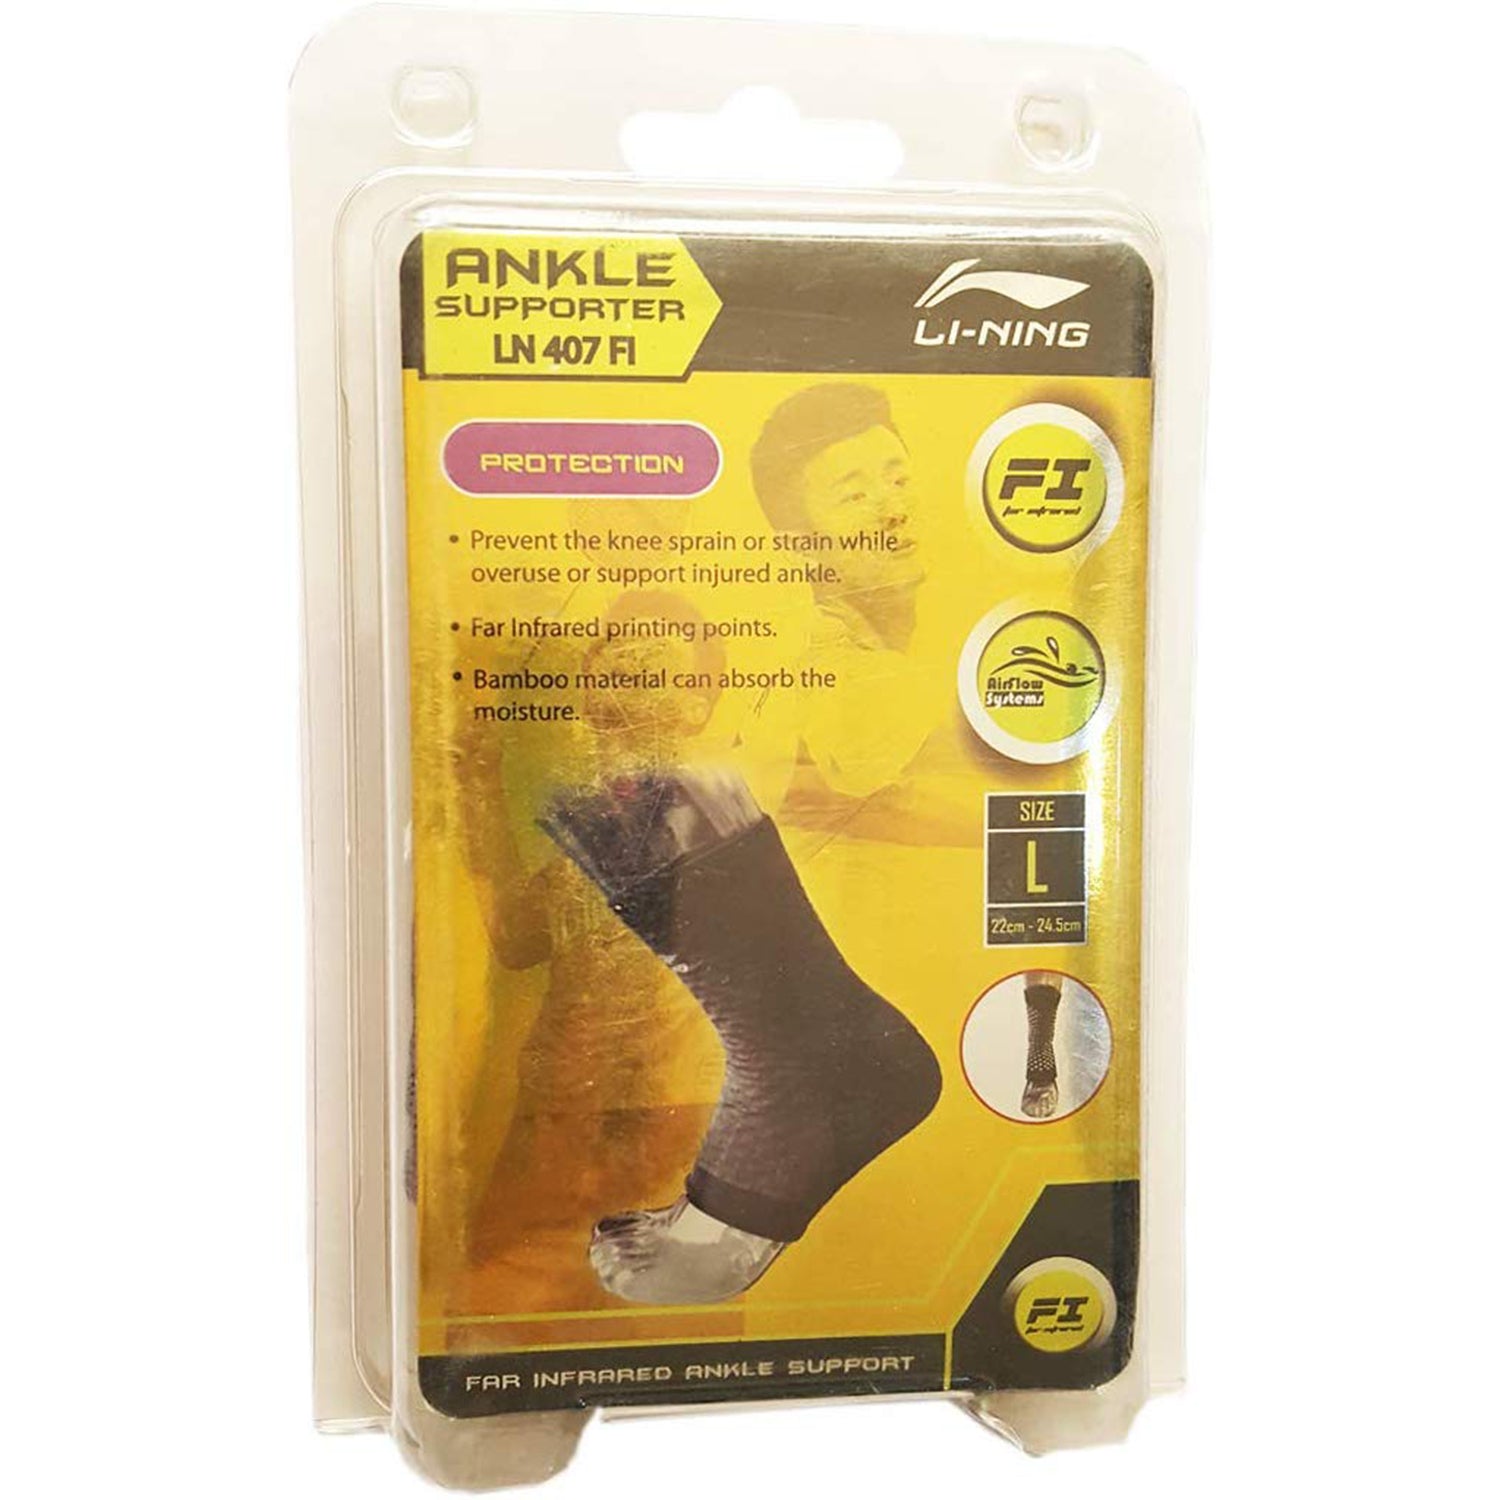 Li-Ning Unisex Ankle Support Suitable for Running, Pain Relief, Gym - Pack of 1 - Grey - Best Price online Prokicksports.com